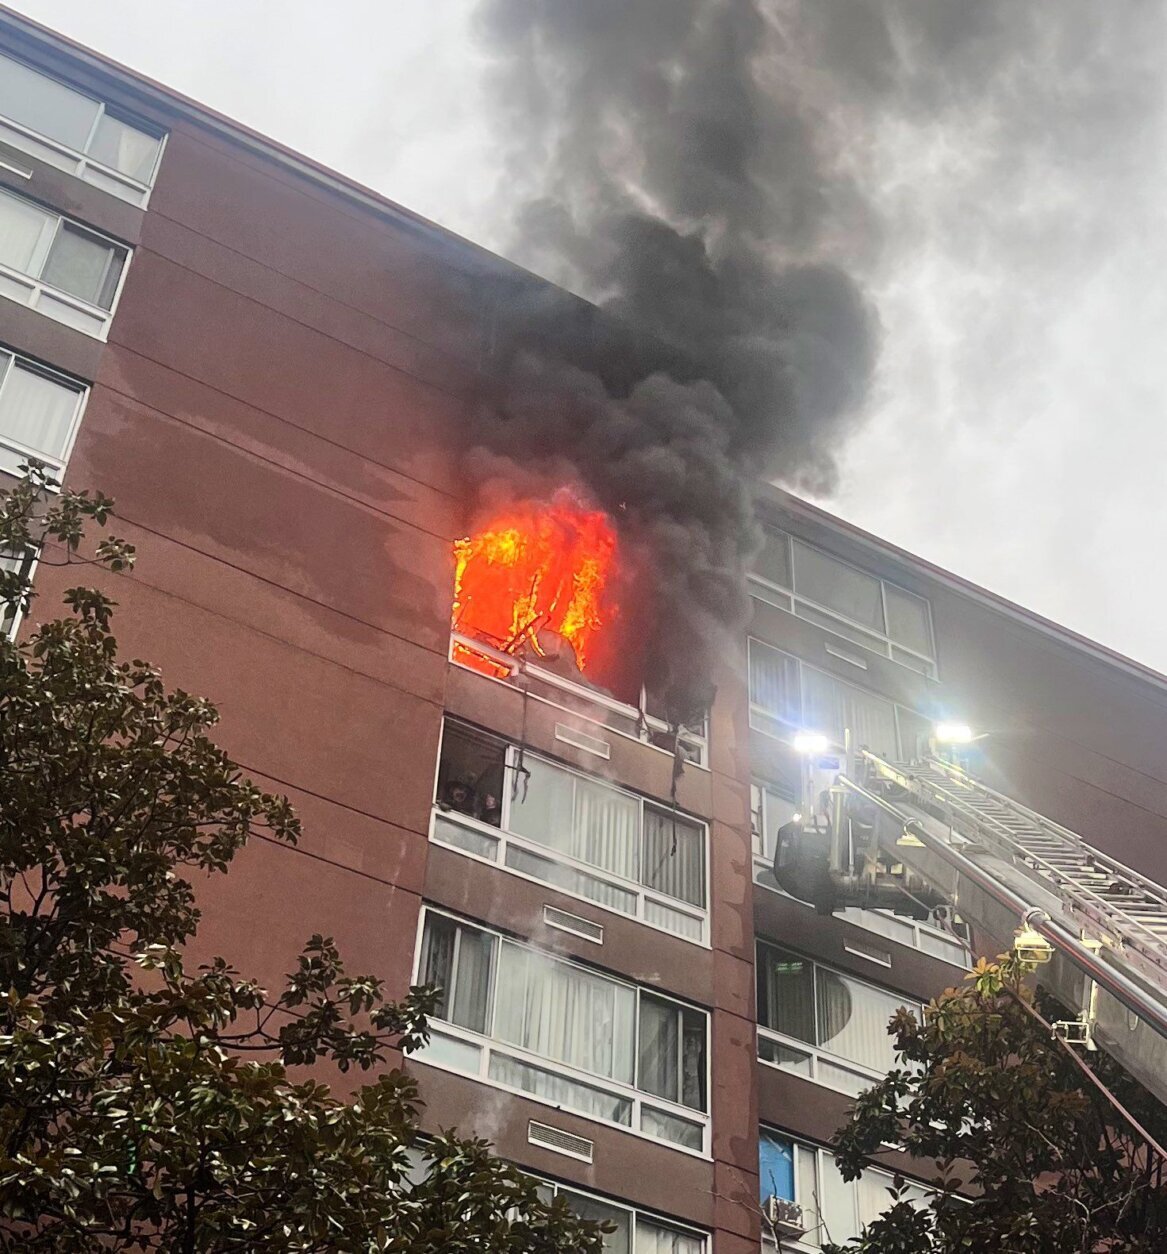 Fire in a Northwest DC apartment building